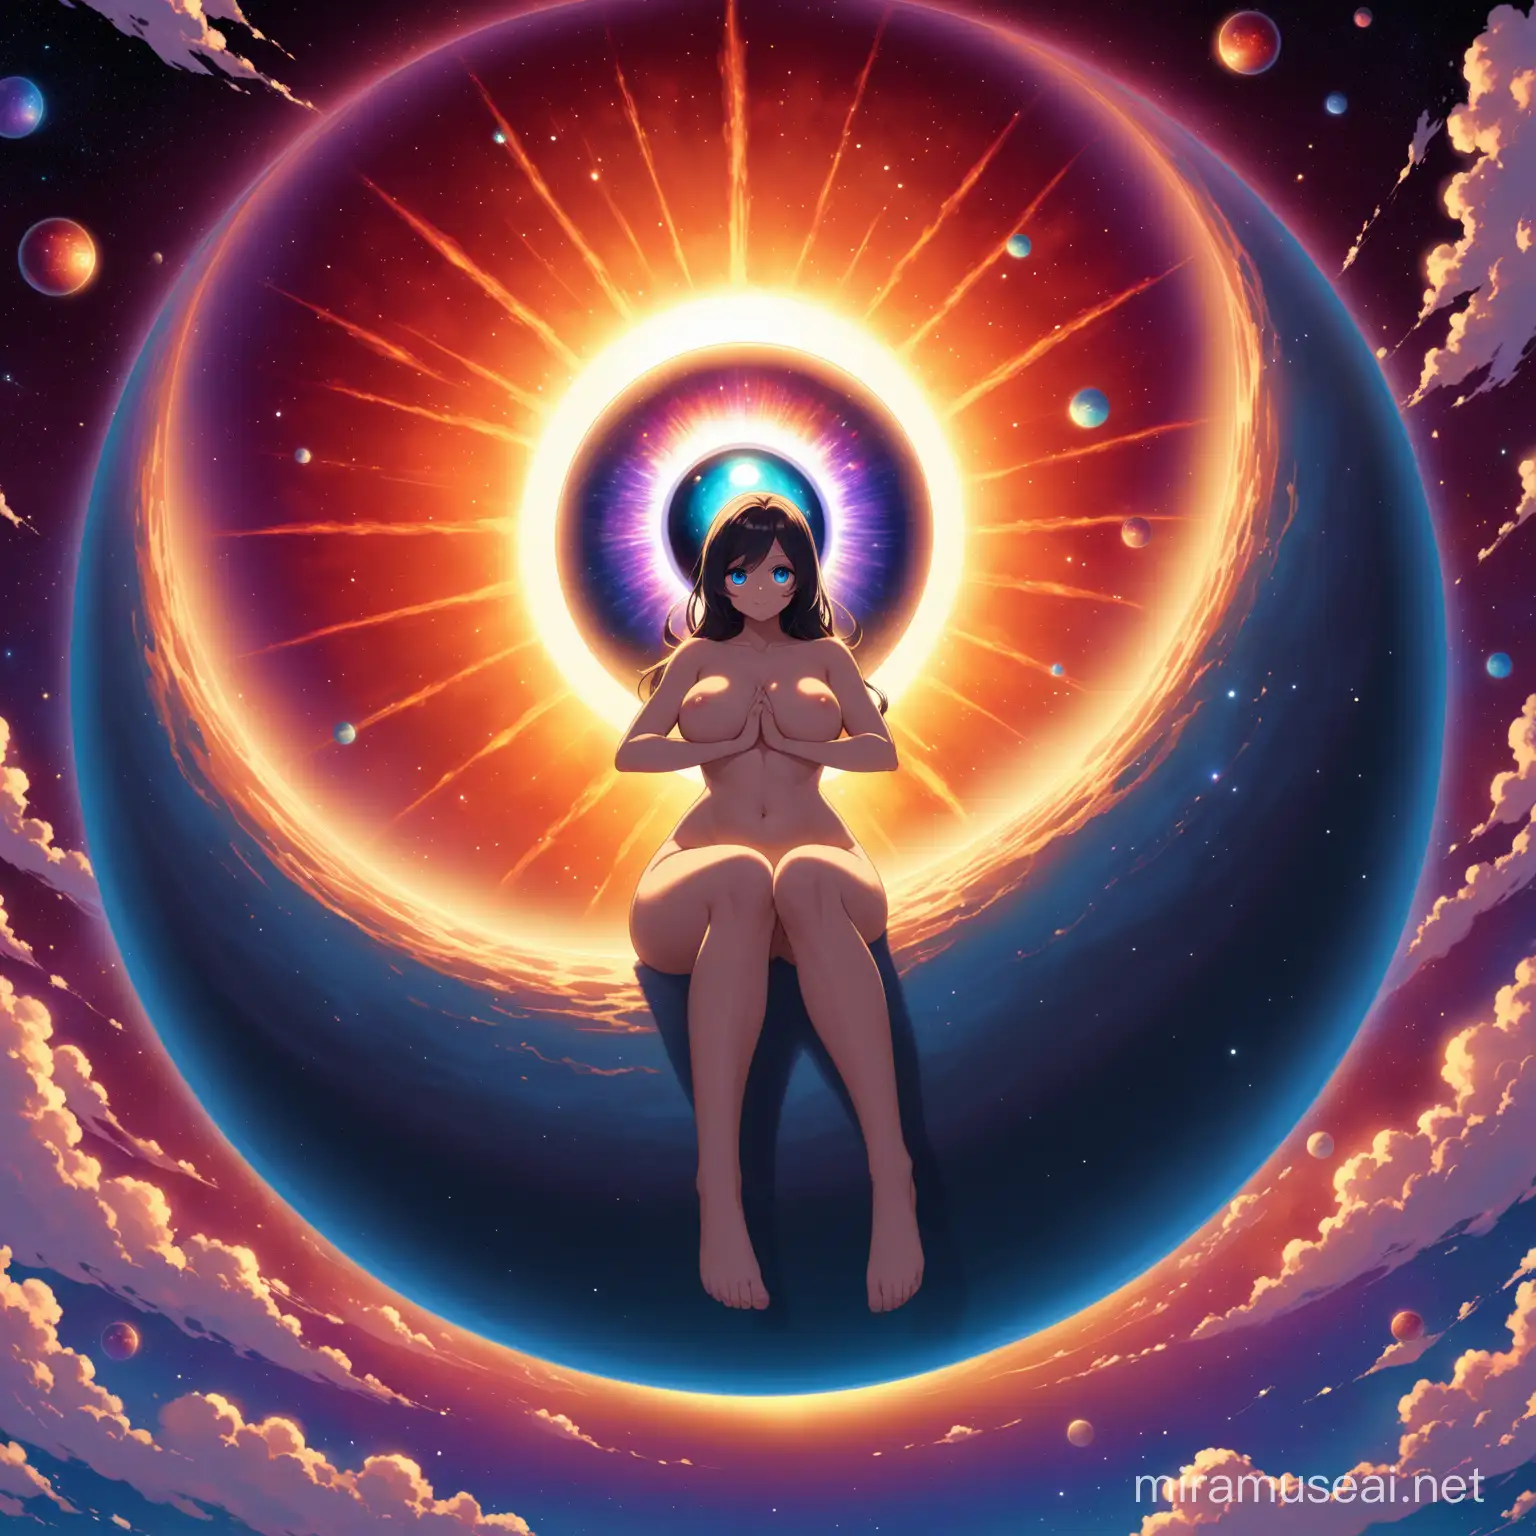 Nude Woman Sitting on Giant Floating Eyeball at Sunset in Space